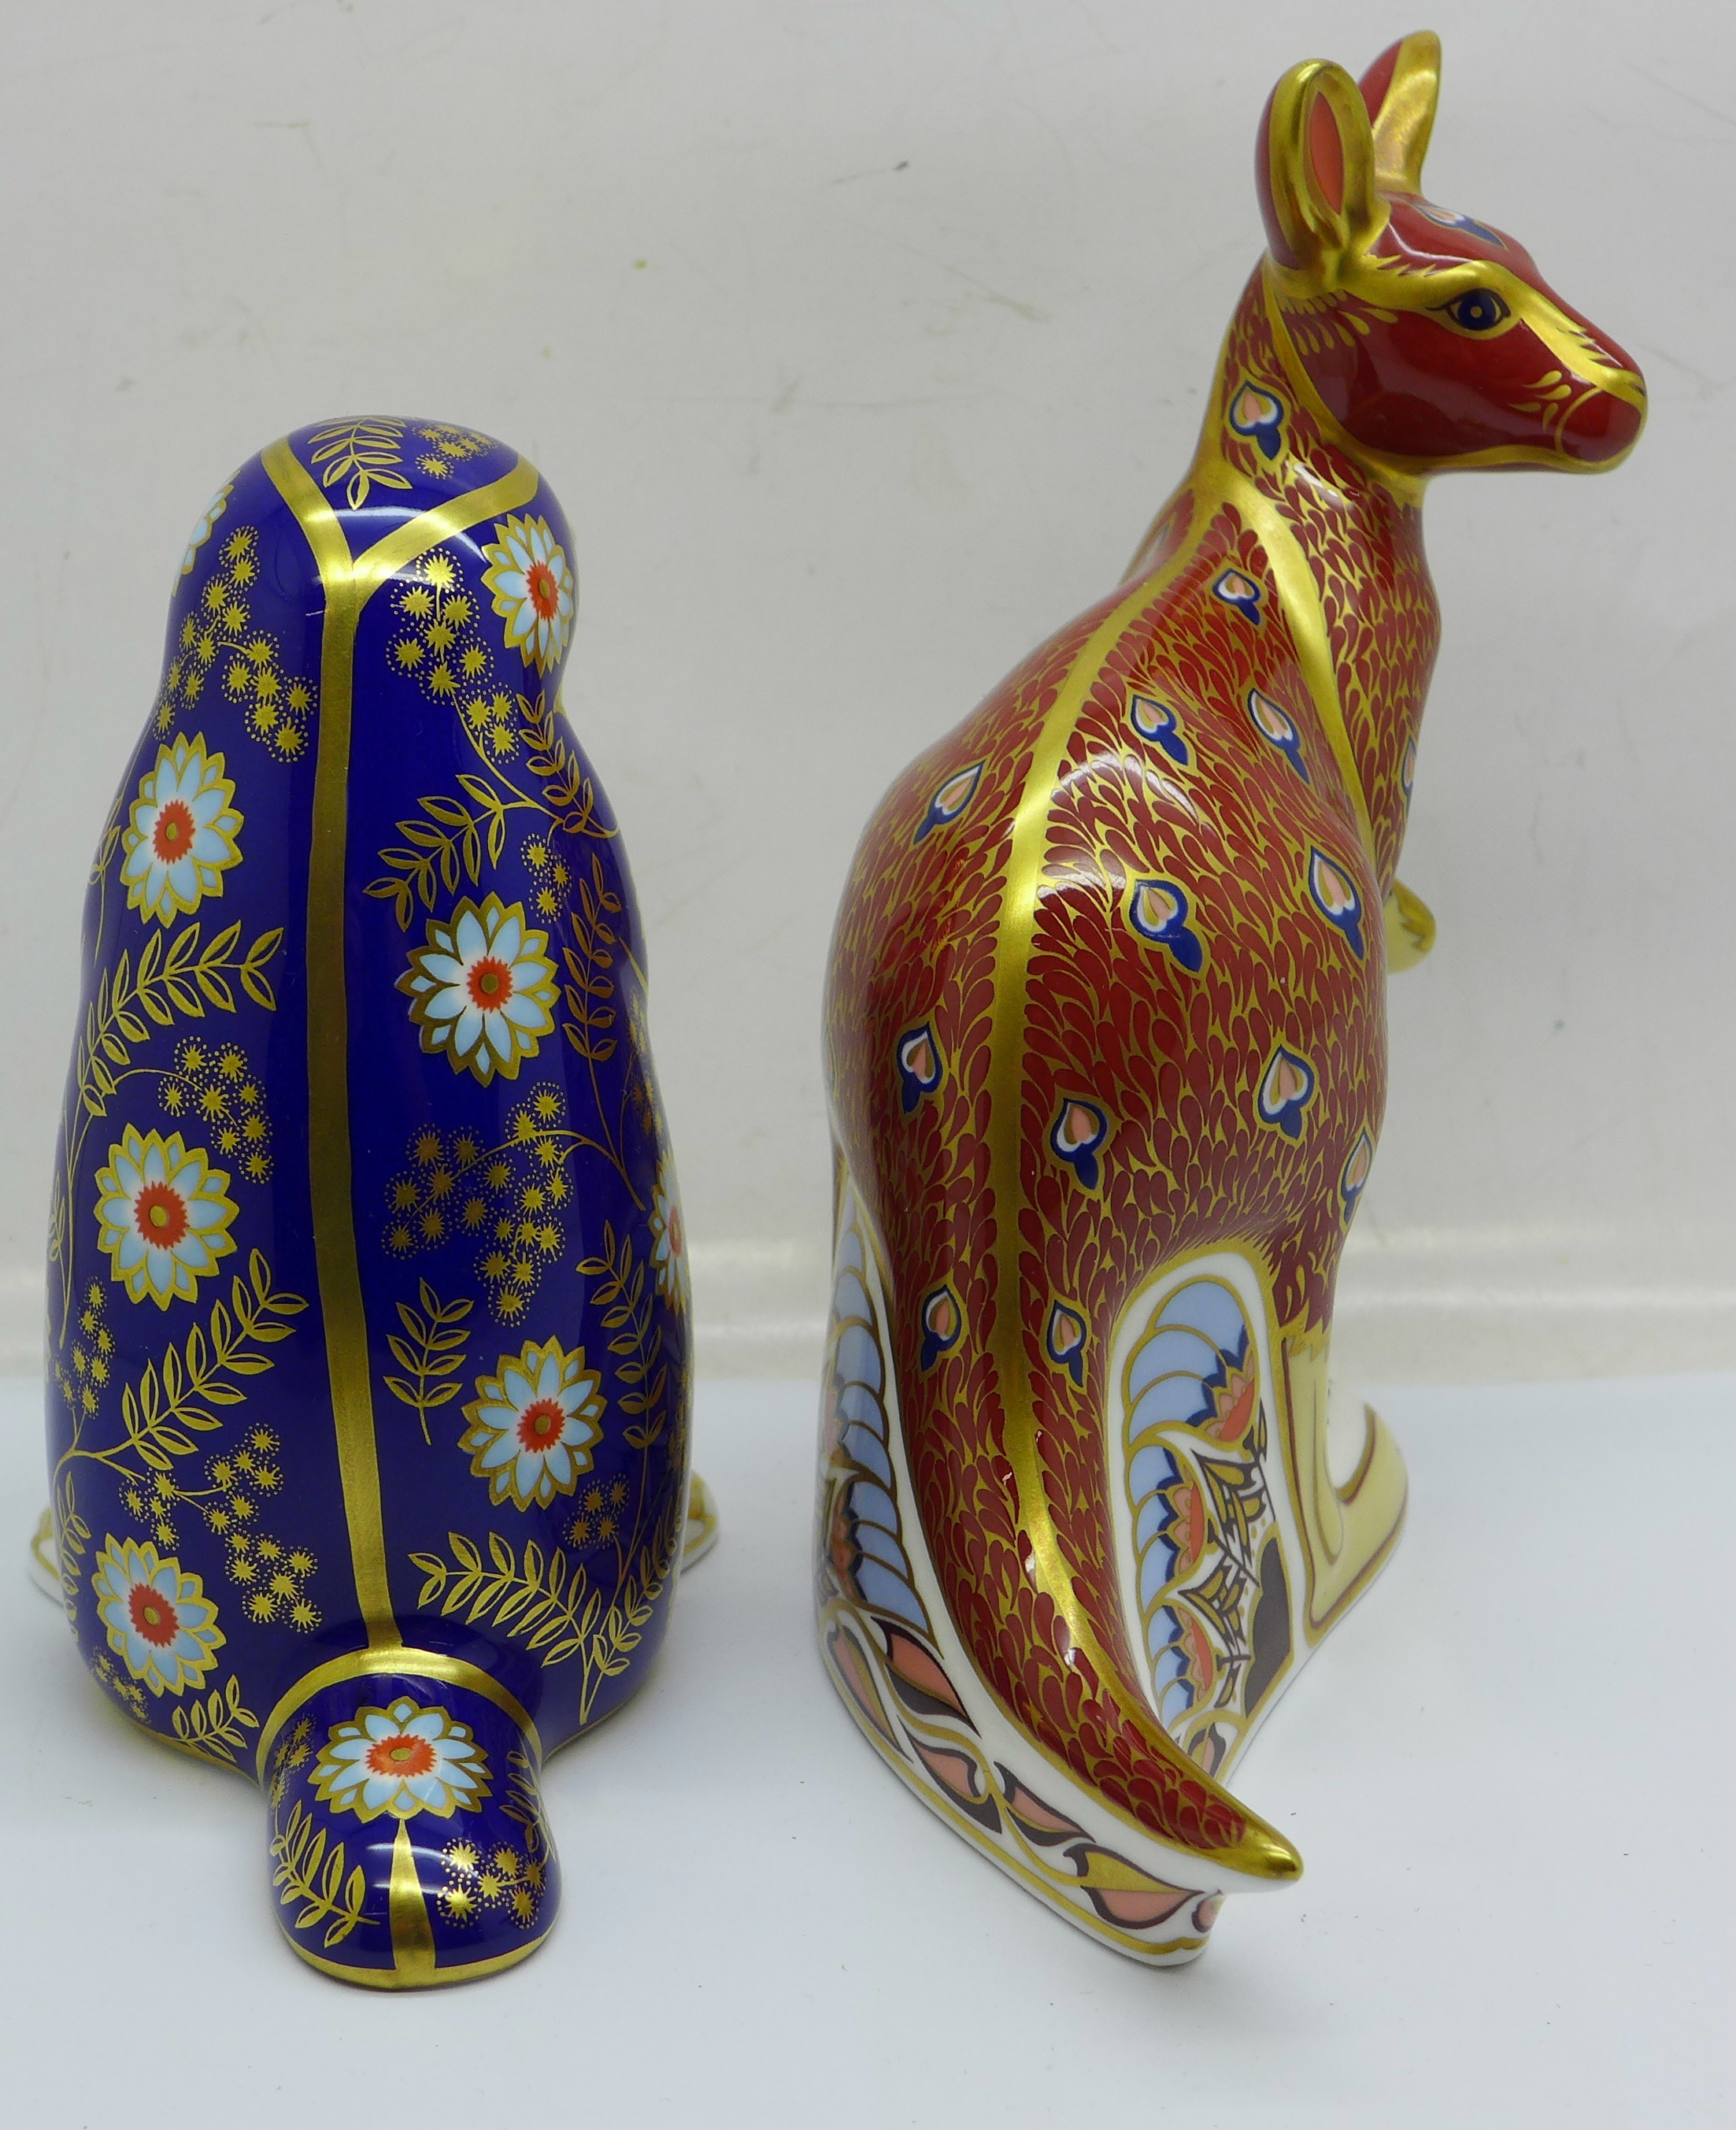 Two Royal Crown Derby paperweights - from the Australian Collection 'Kangaroo' (with joey), John - Image 3 of 5